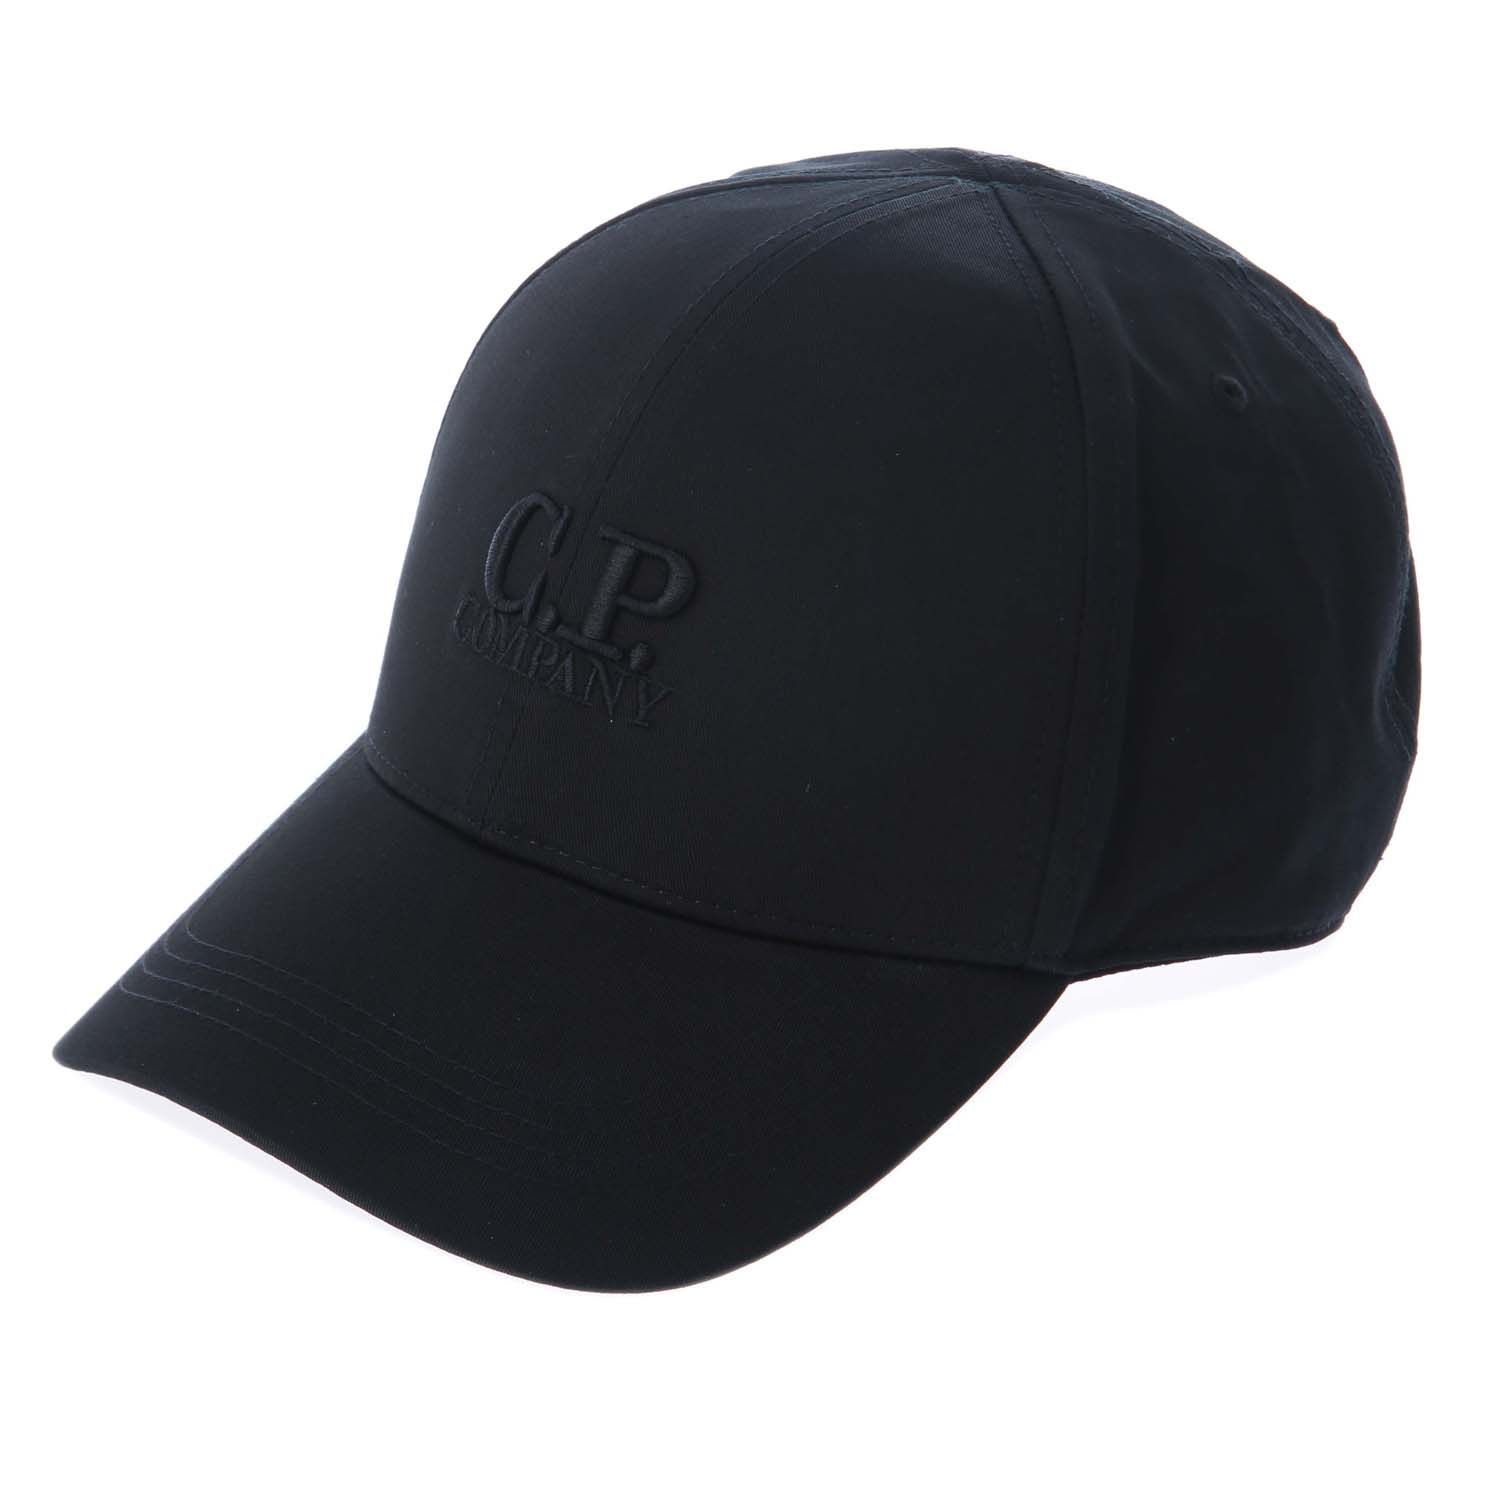 Mens C.P. Company Logo Cap in black.- Adjustable strap.- 6 panel construction.- Peak and the brands signature logo embroidered to the centre front.- Cotton twill.- 100% Cotton. Machine washable.- Ref: 12CMAC015A999